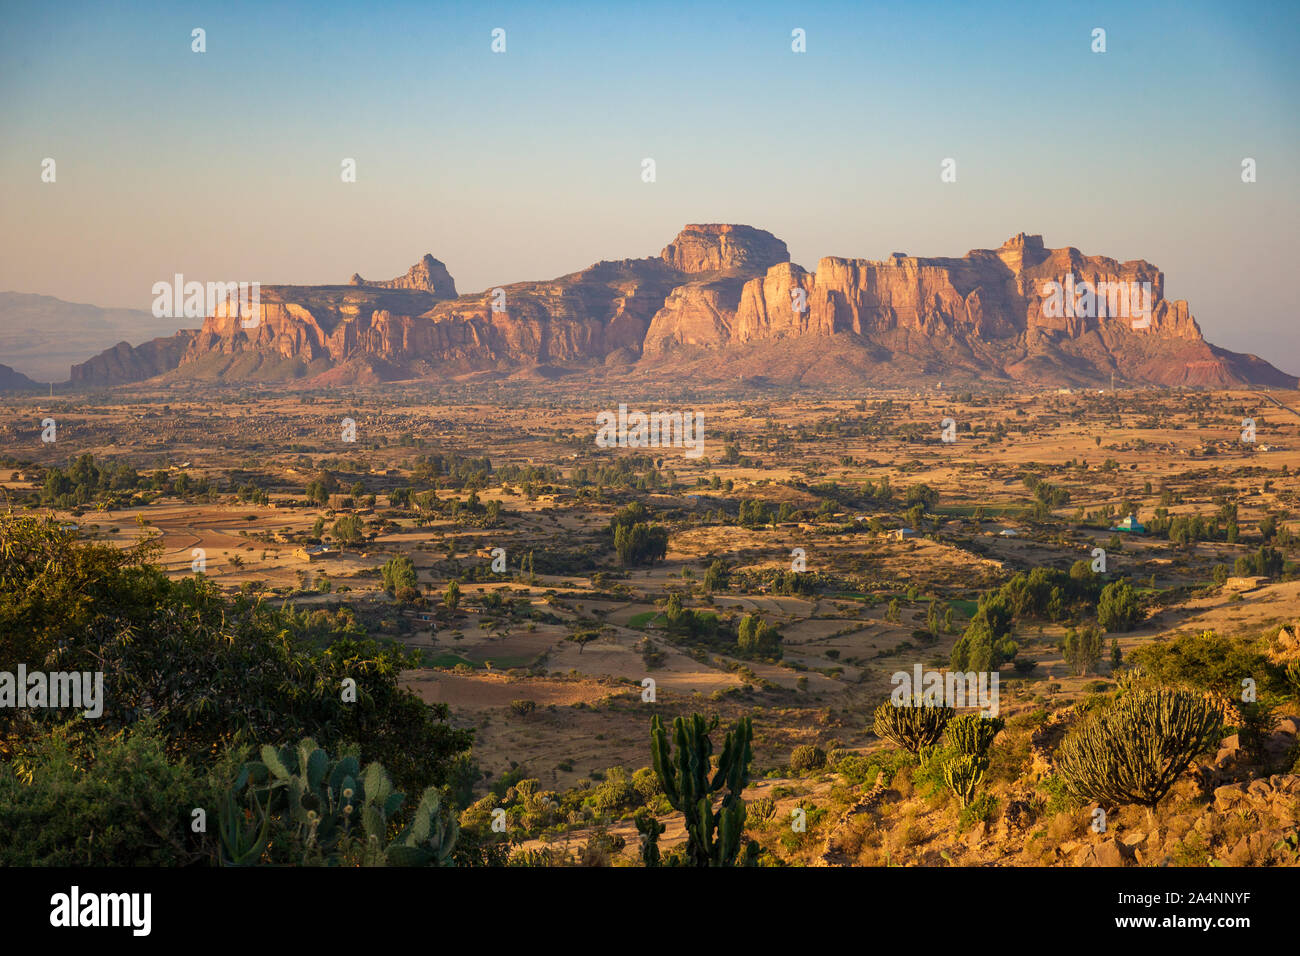 The landscape of Gheralta in Tigray, Northern Ethiopia Stock Photo